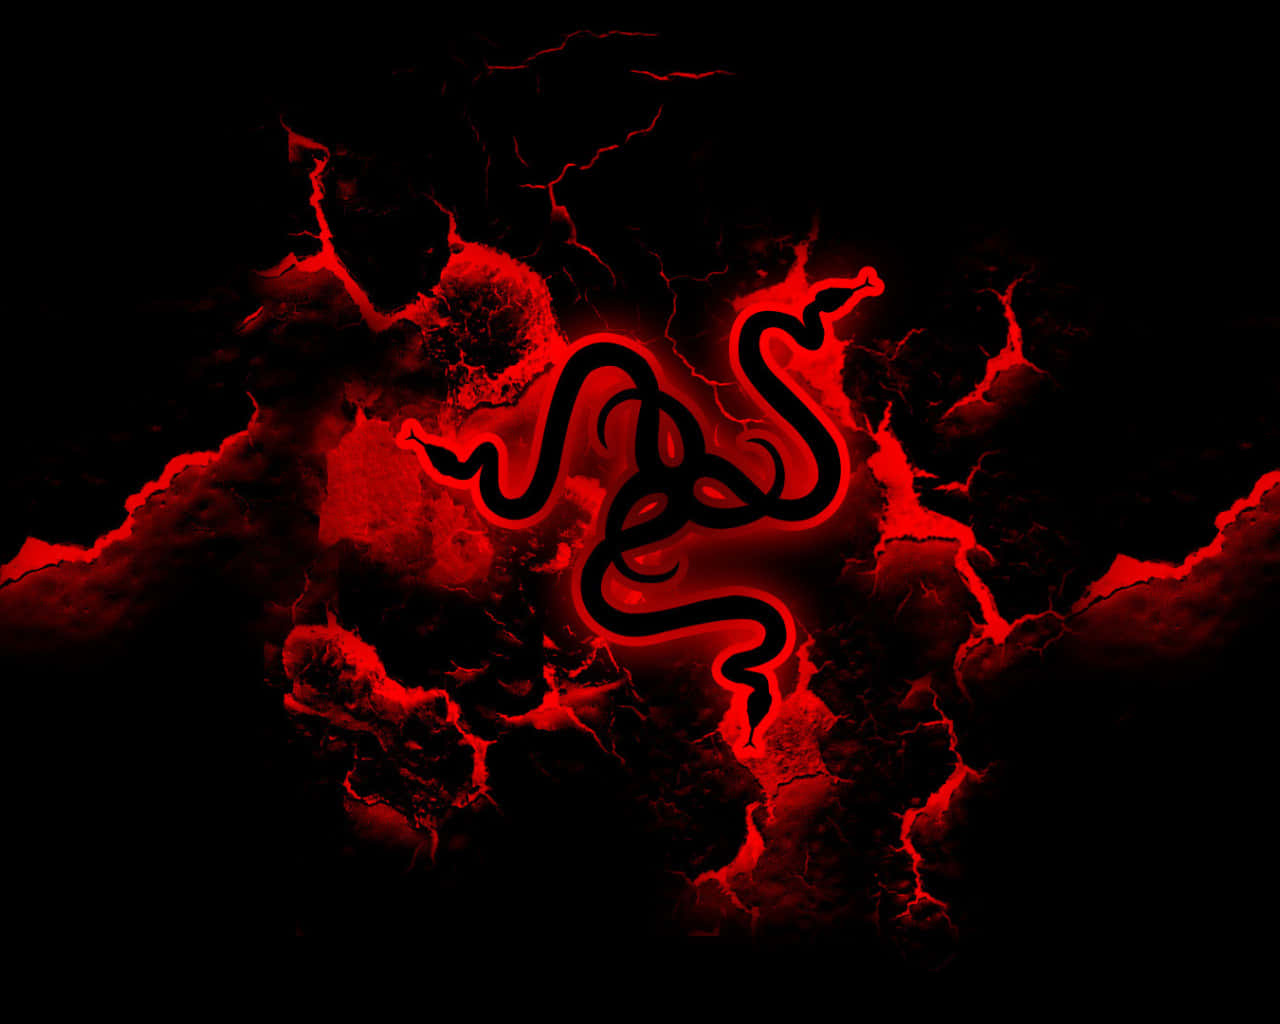 A Red And Black Dragon Logo On A Black Background Wallpaper